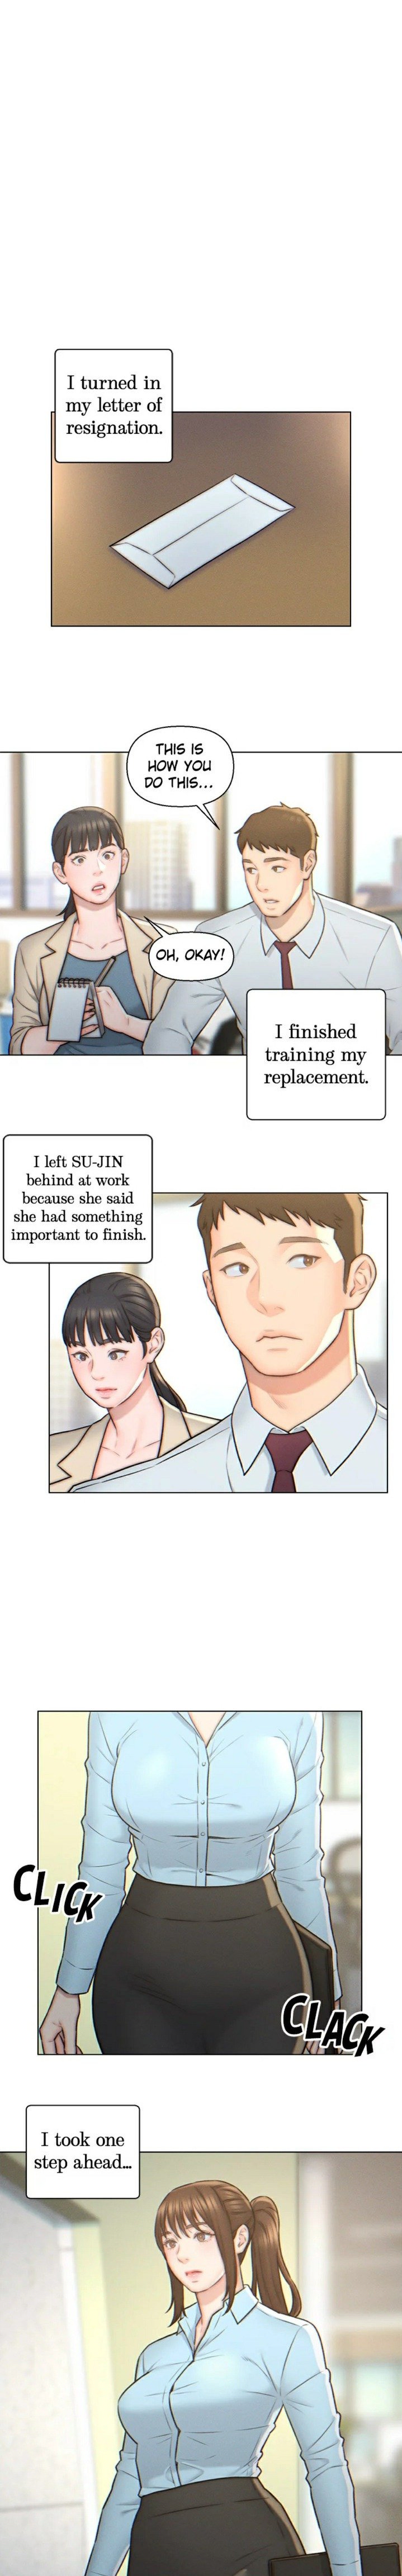 live-in-son-in-law-chap-3-0